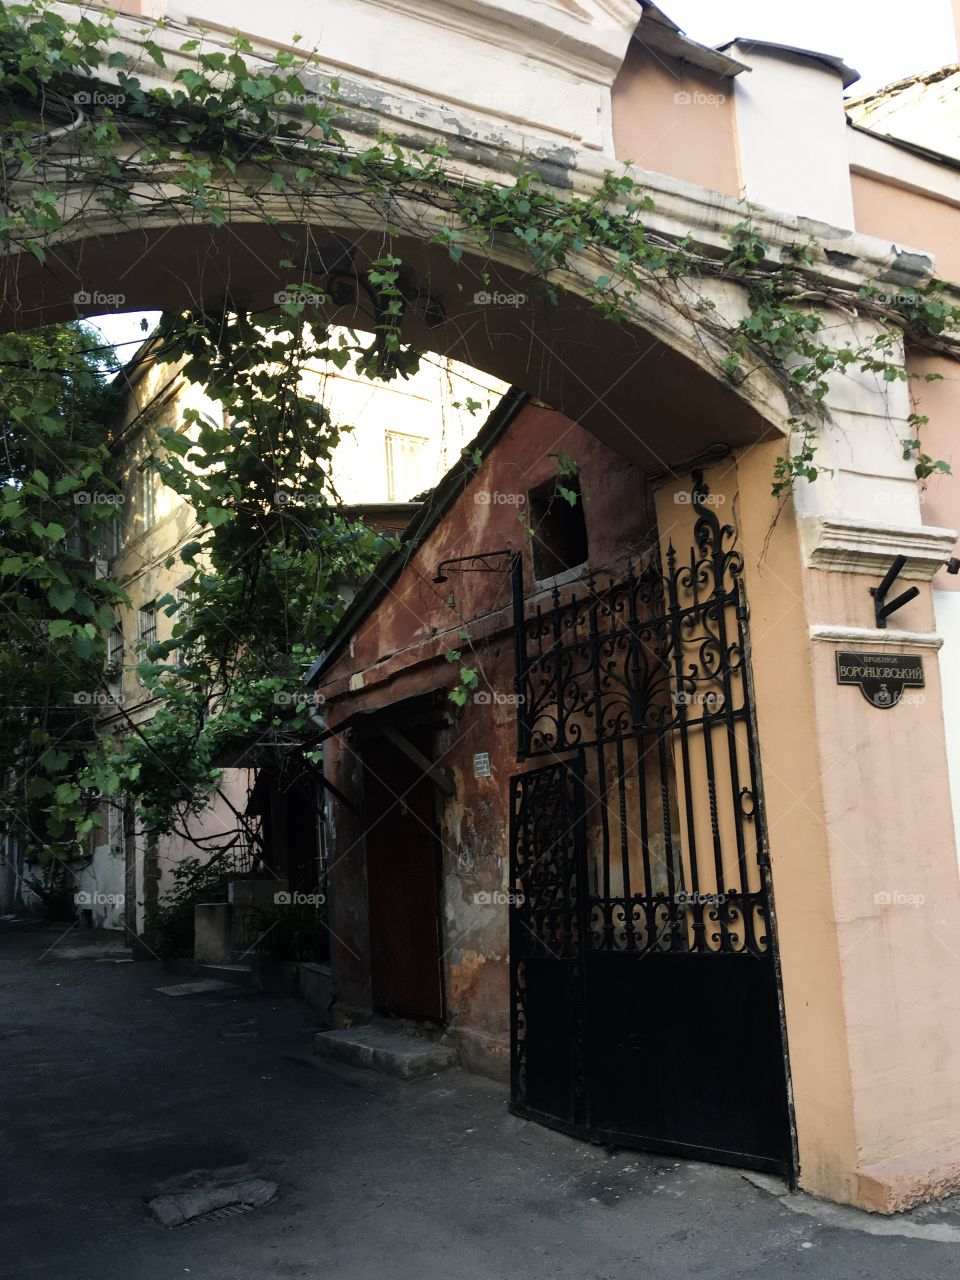 The old part of Odessa city, Ukraine. The 29th of May, 2019, evening. The Vorontsov line, the yard entrance, arch with metal gates.